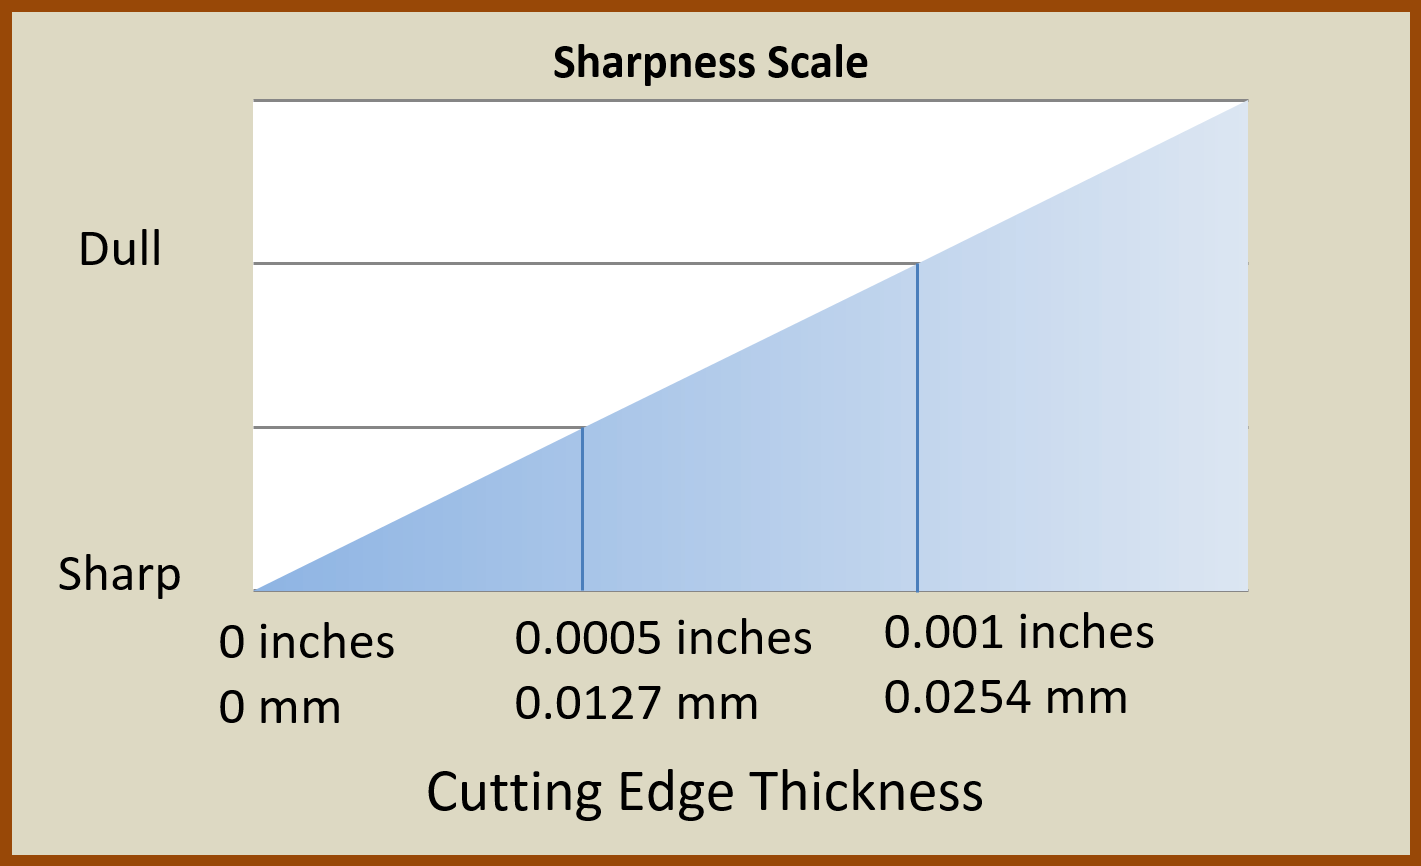 How the thickness of the cutting edge of a tool relates to sharpness.  